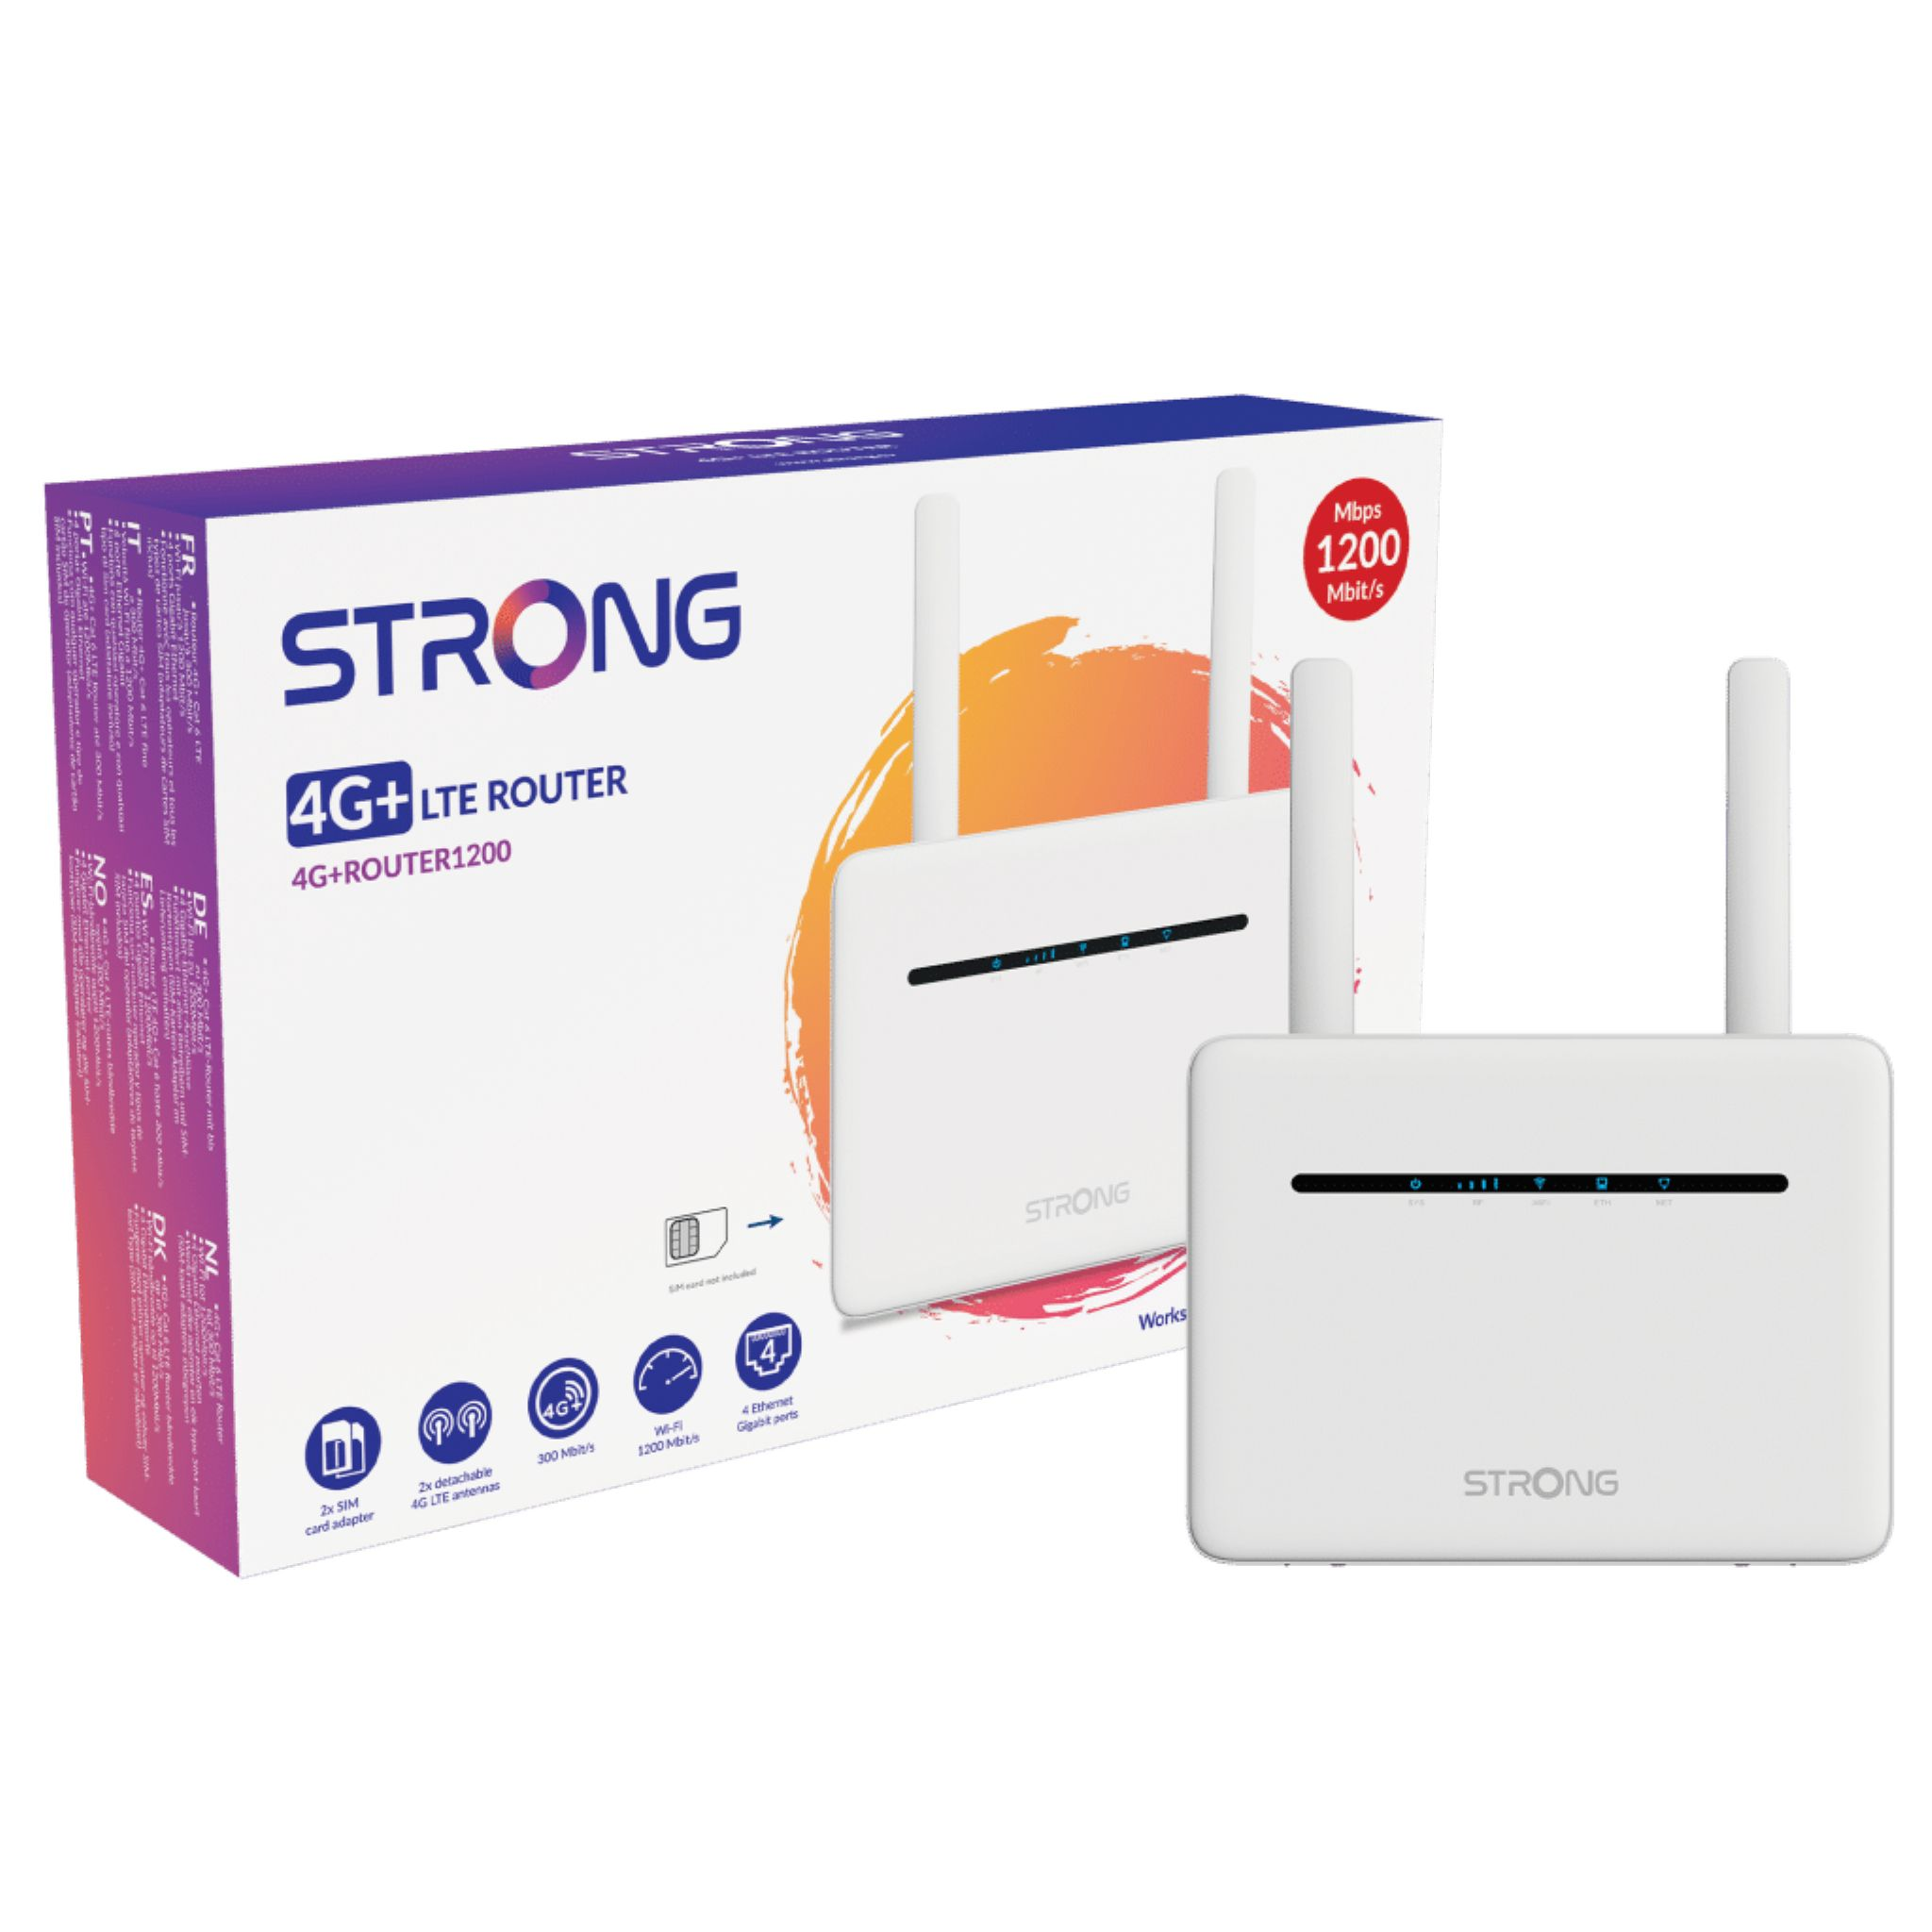 STRONG Router 4G+ 1200